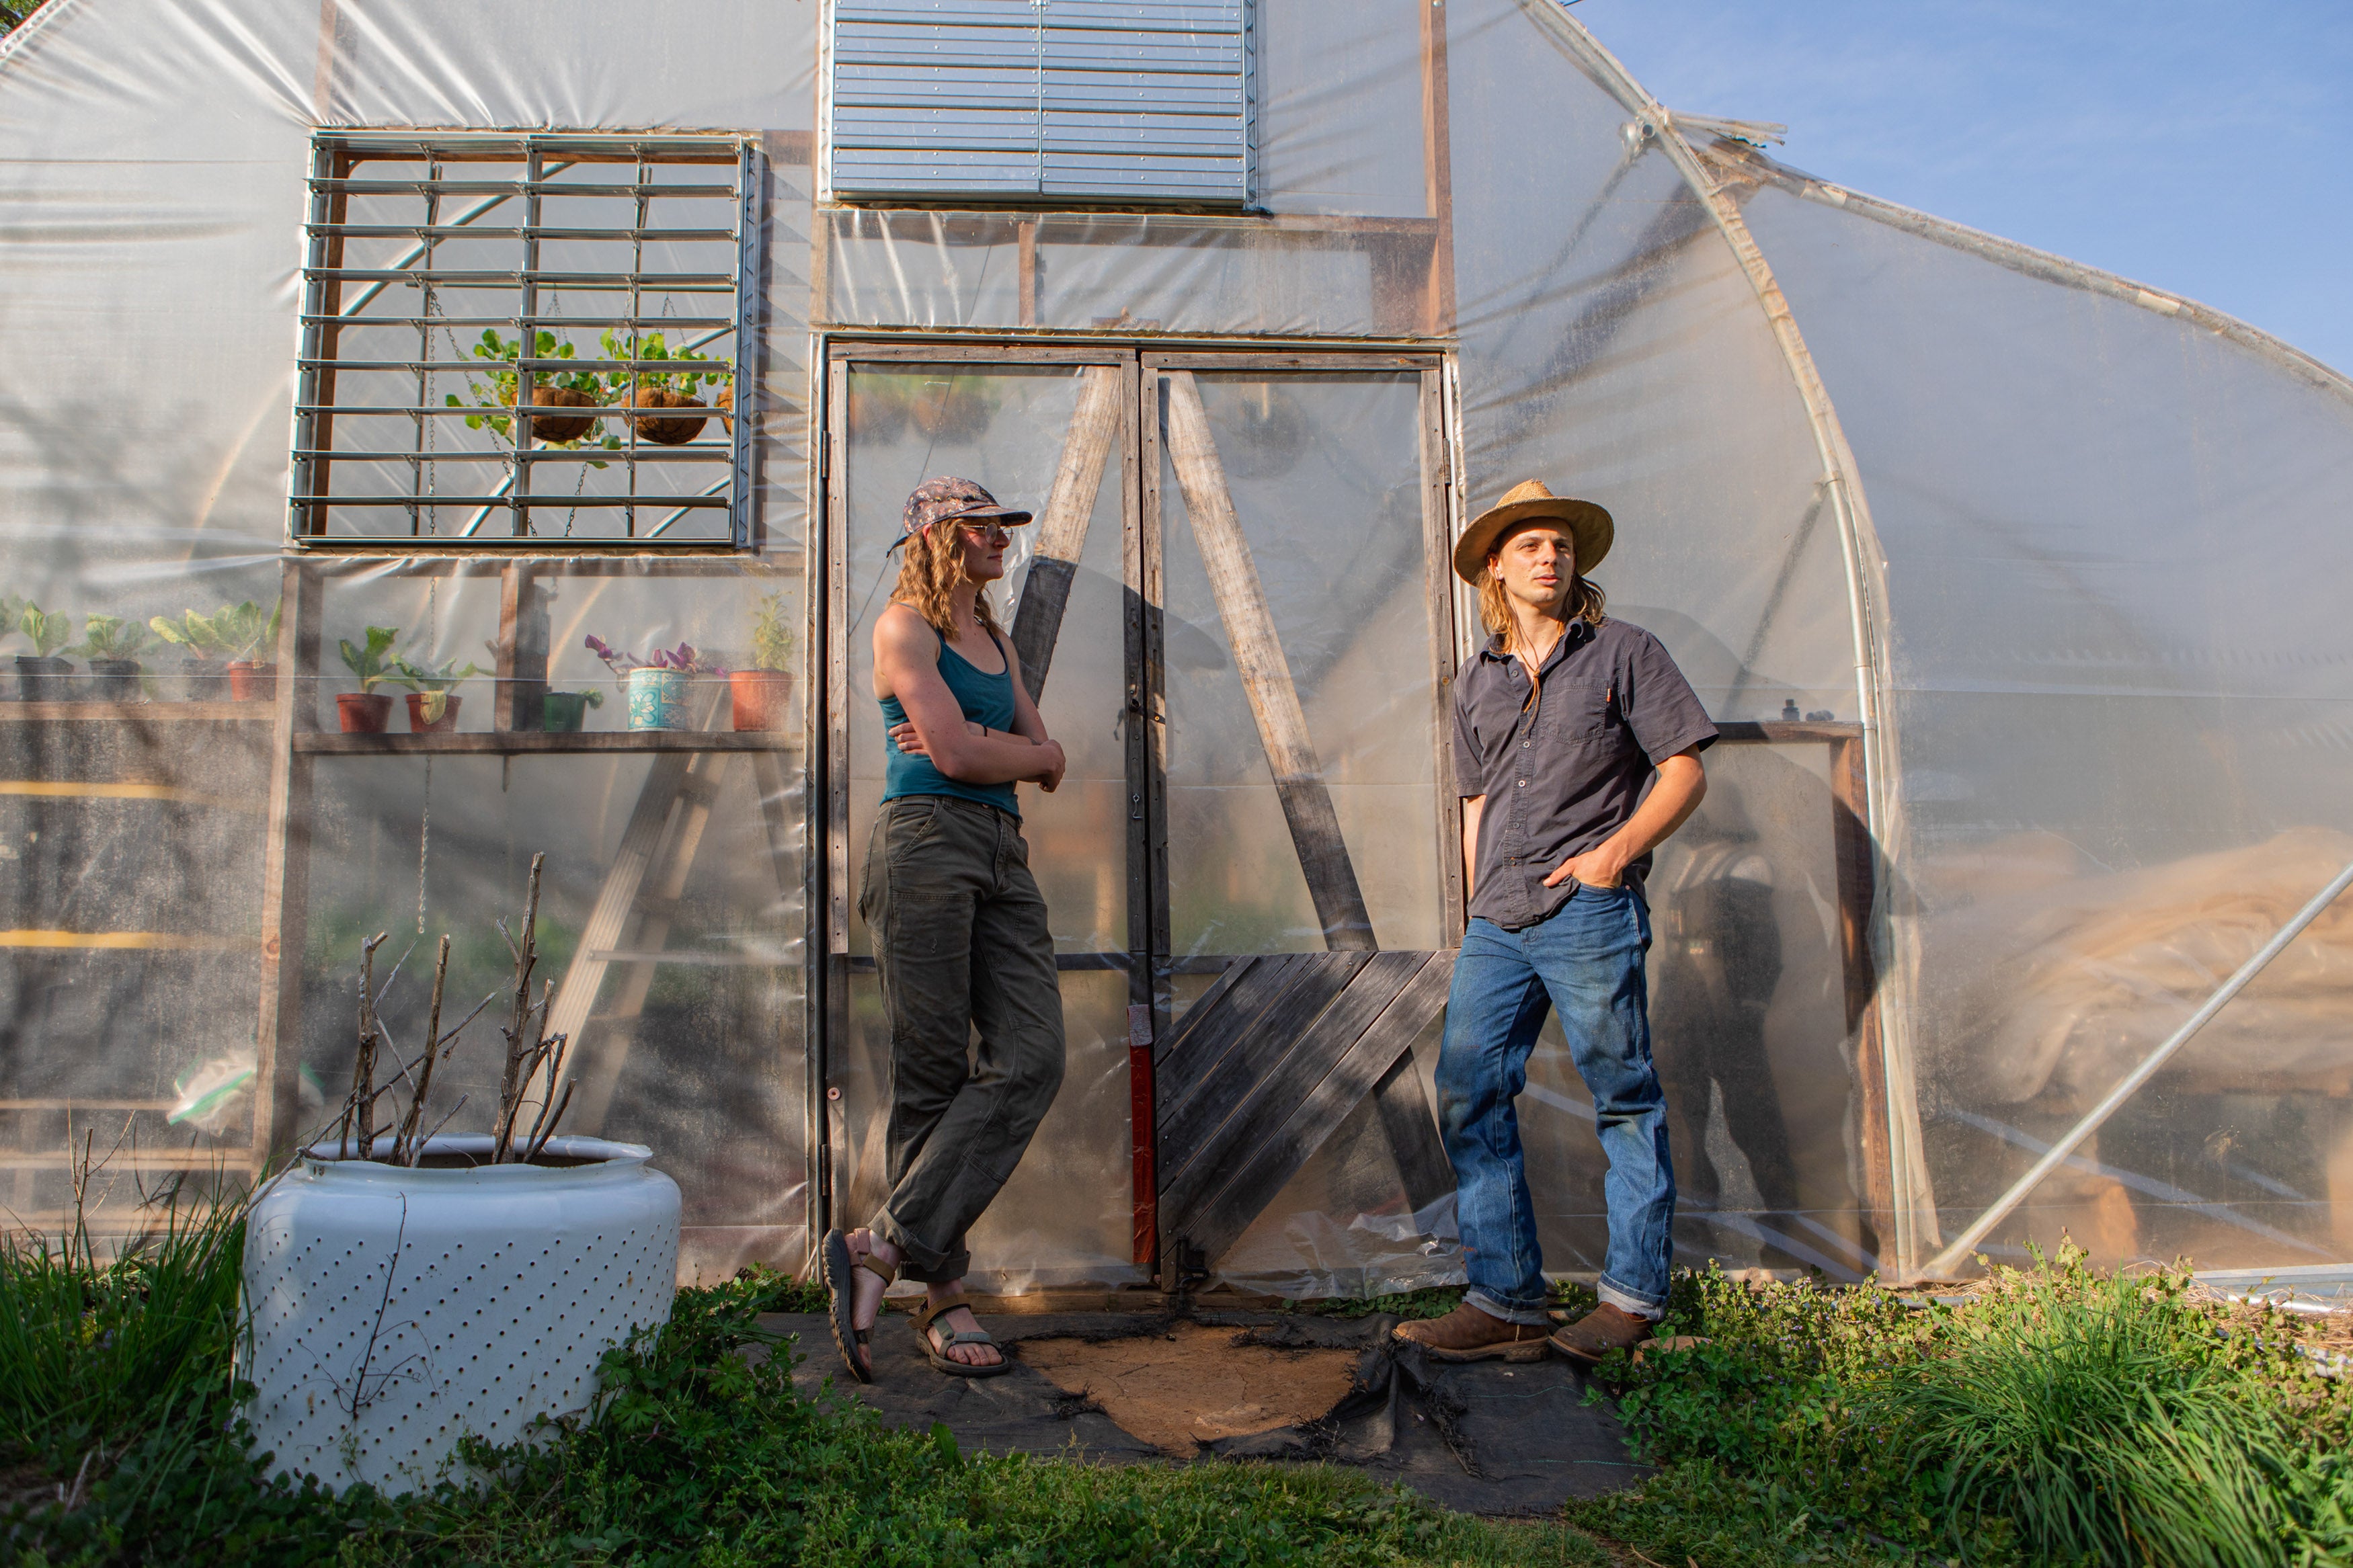 McClelland and O’Neill by a neighbour’s greenhouse in Triplett. Their neighbour is allowing them to borrow the space to house their plants during the off-season